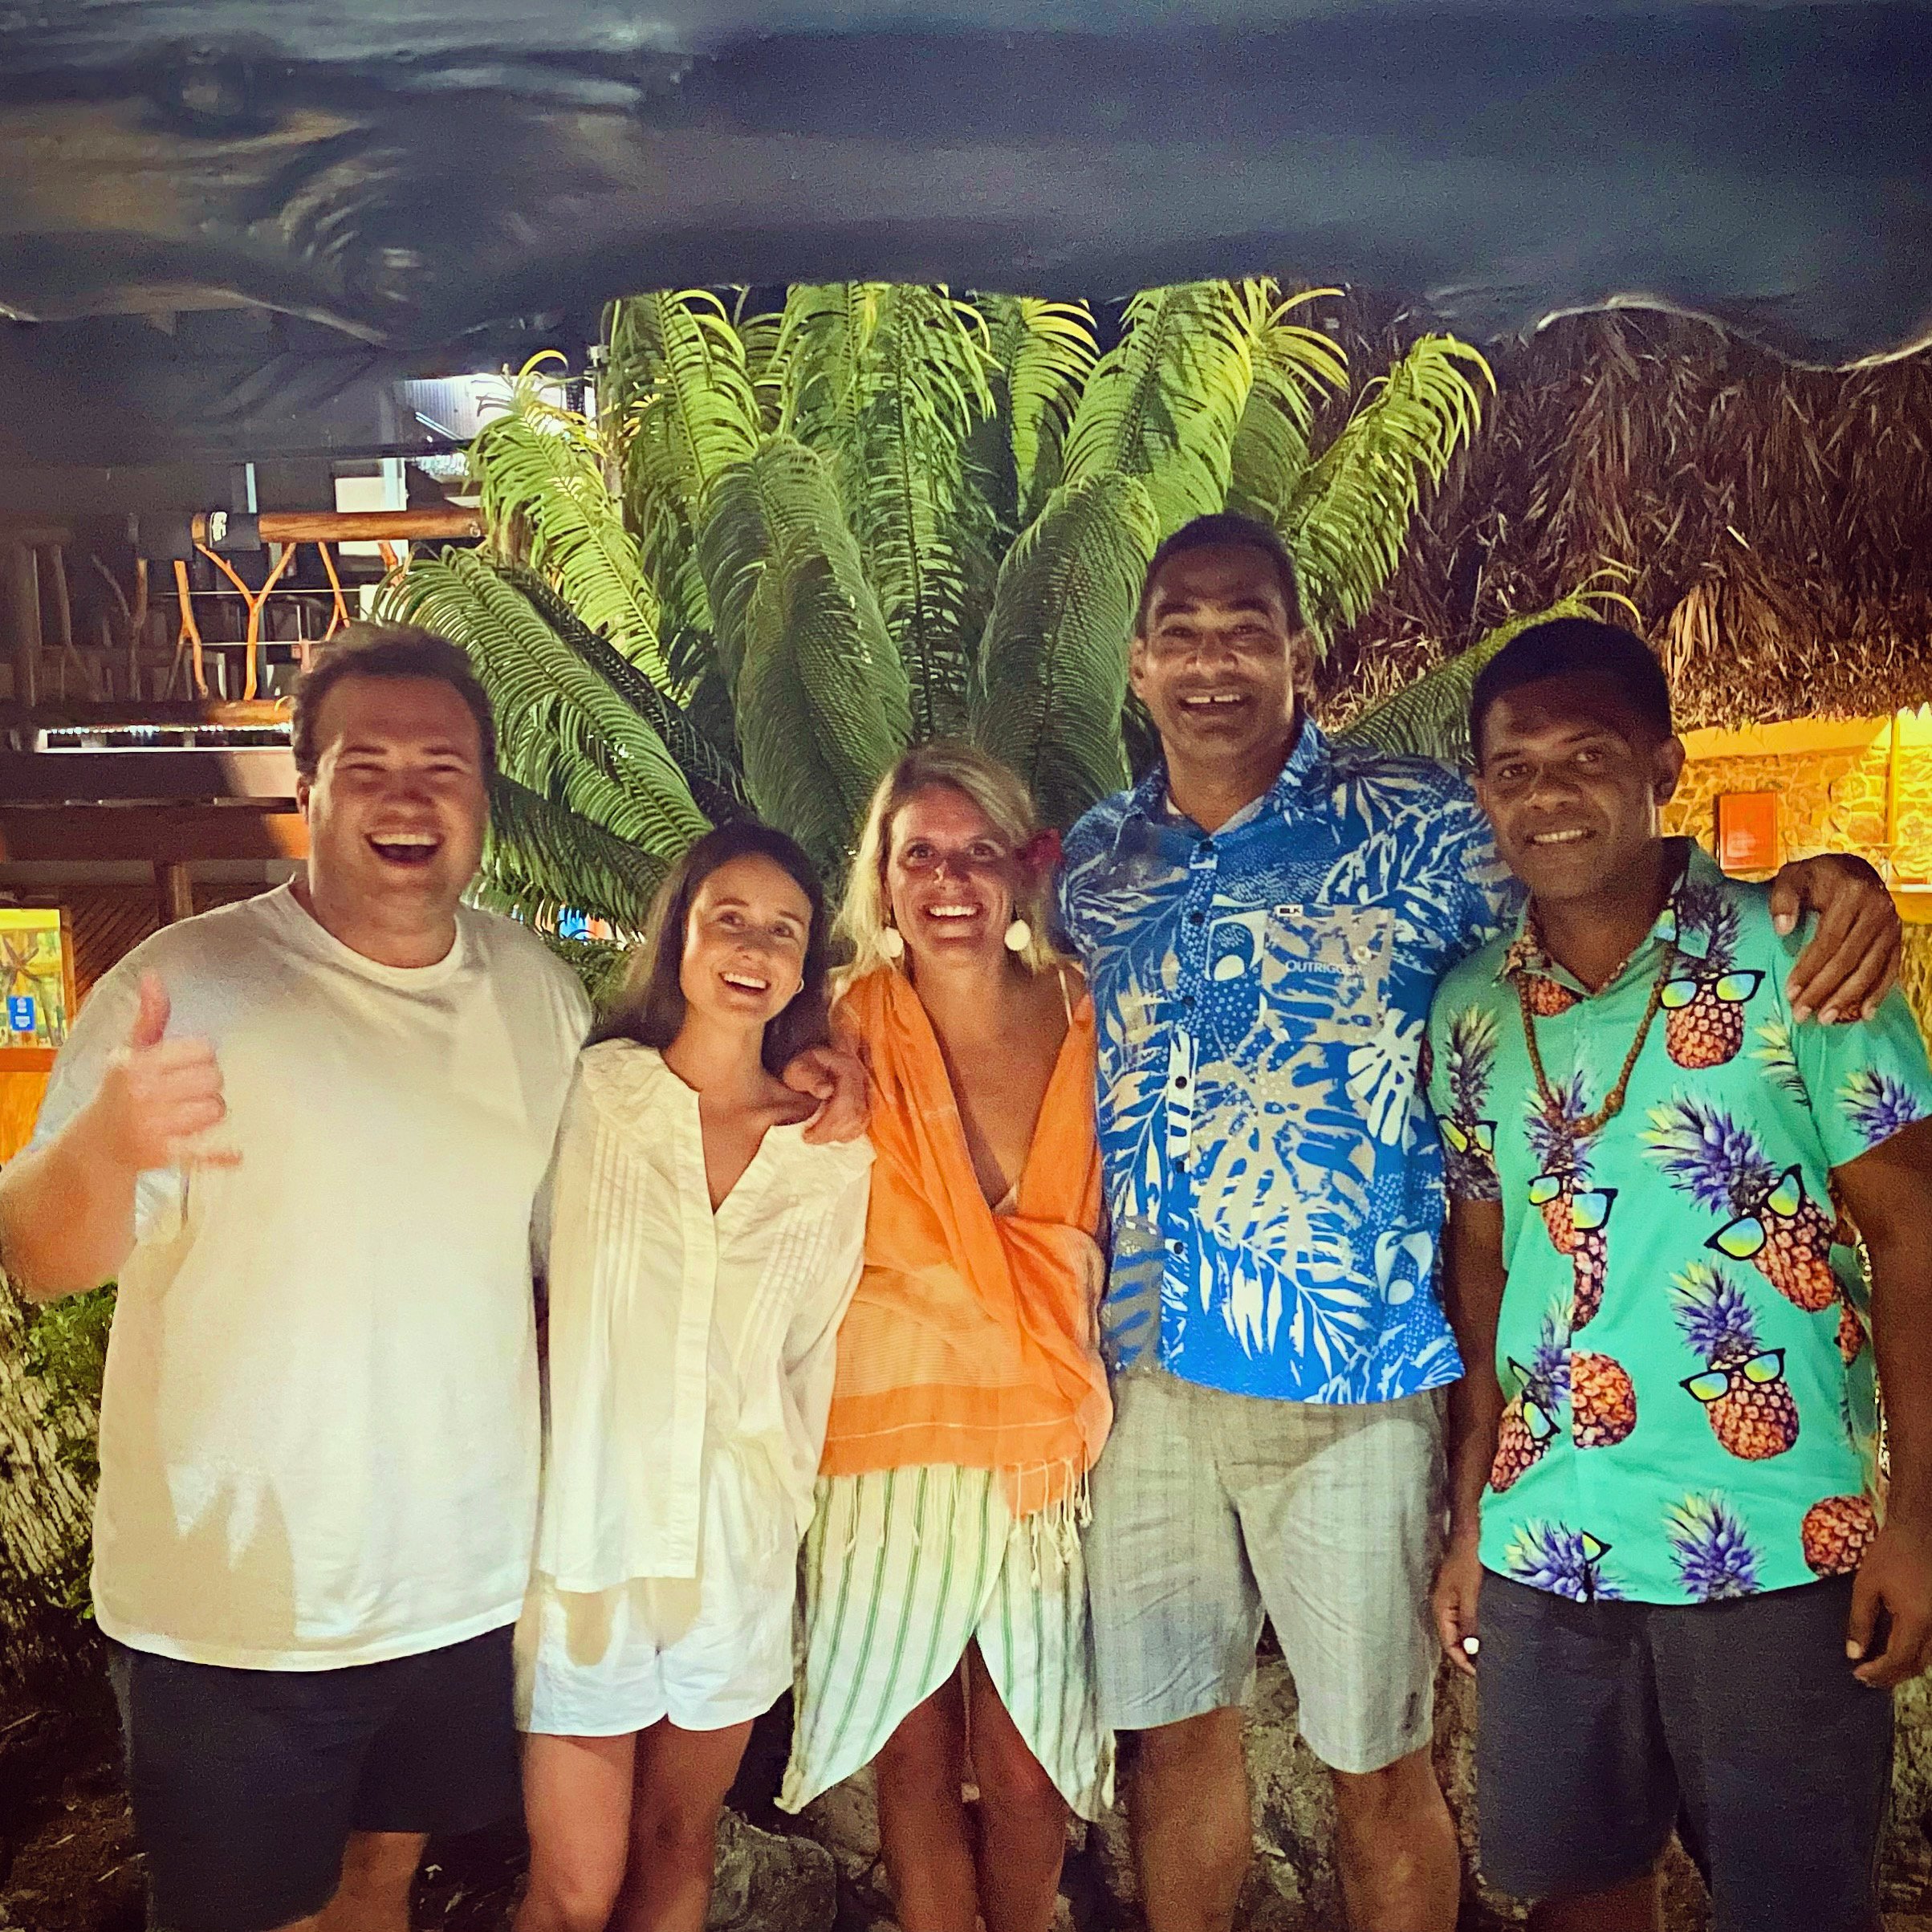 Copy of Dinner with photographers Oliver Neville and Kate Torpy,  and Castaway Island_s Steven Andrews and Meli Titoko, at Castaway Island..JPG